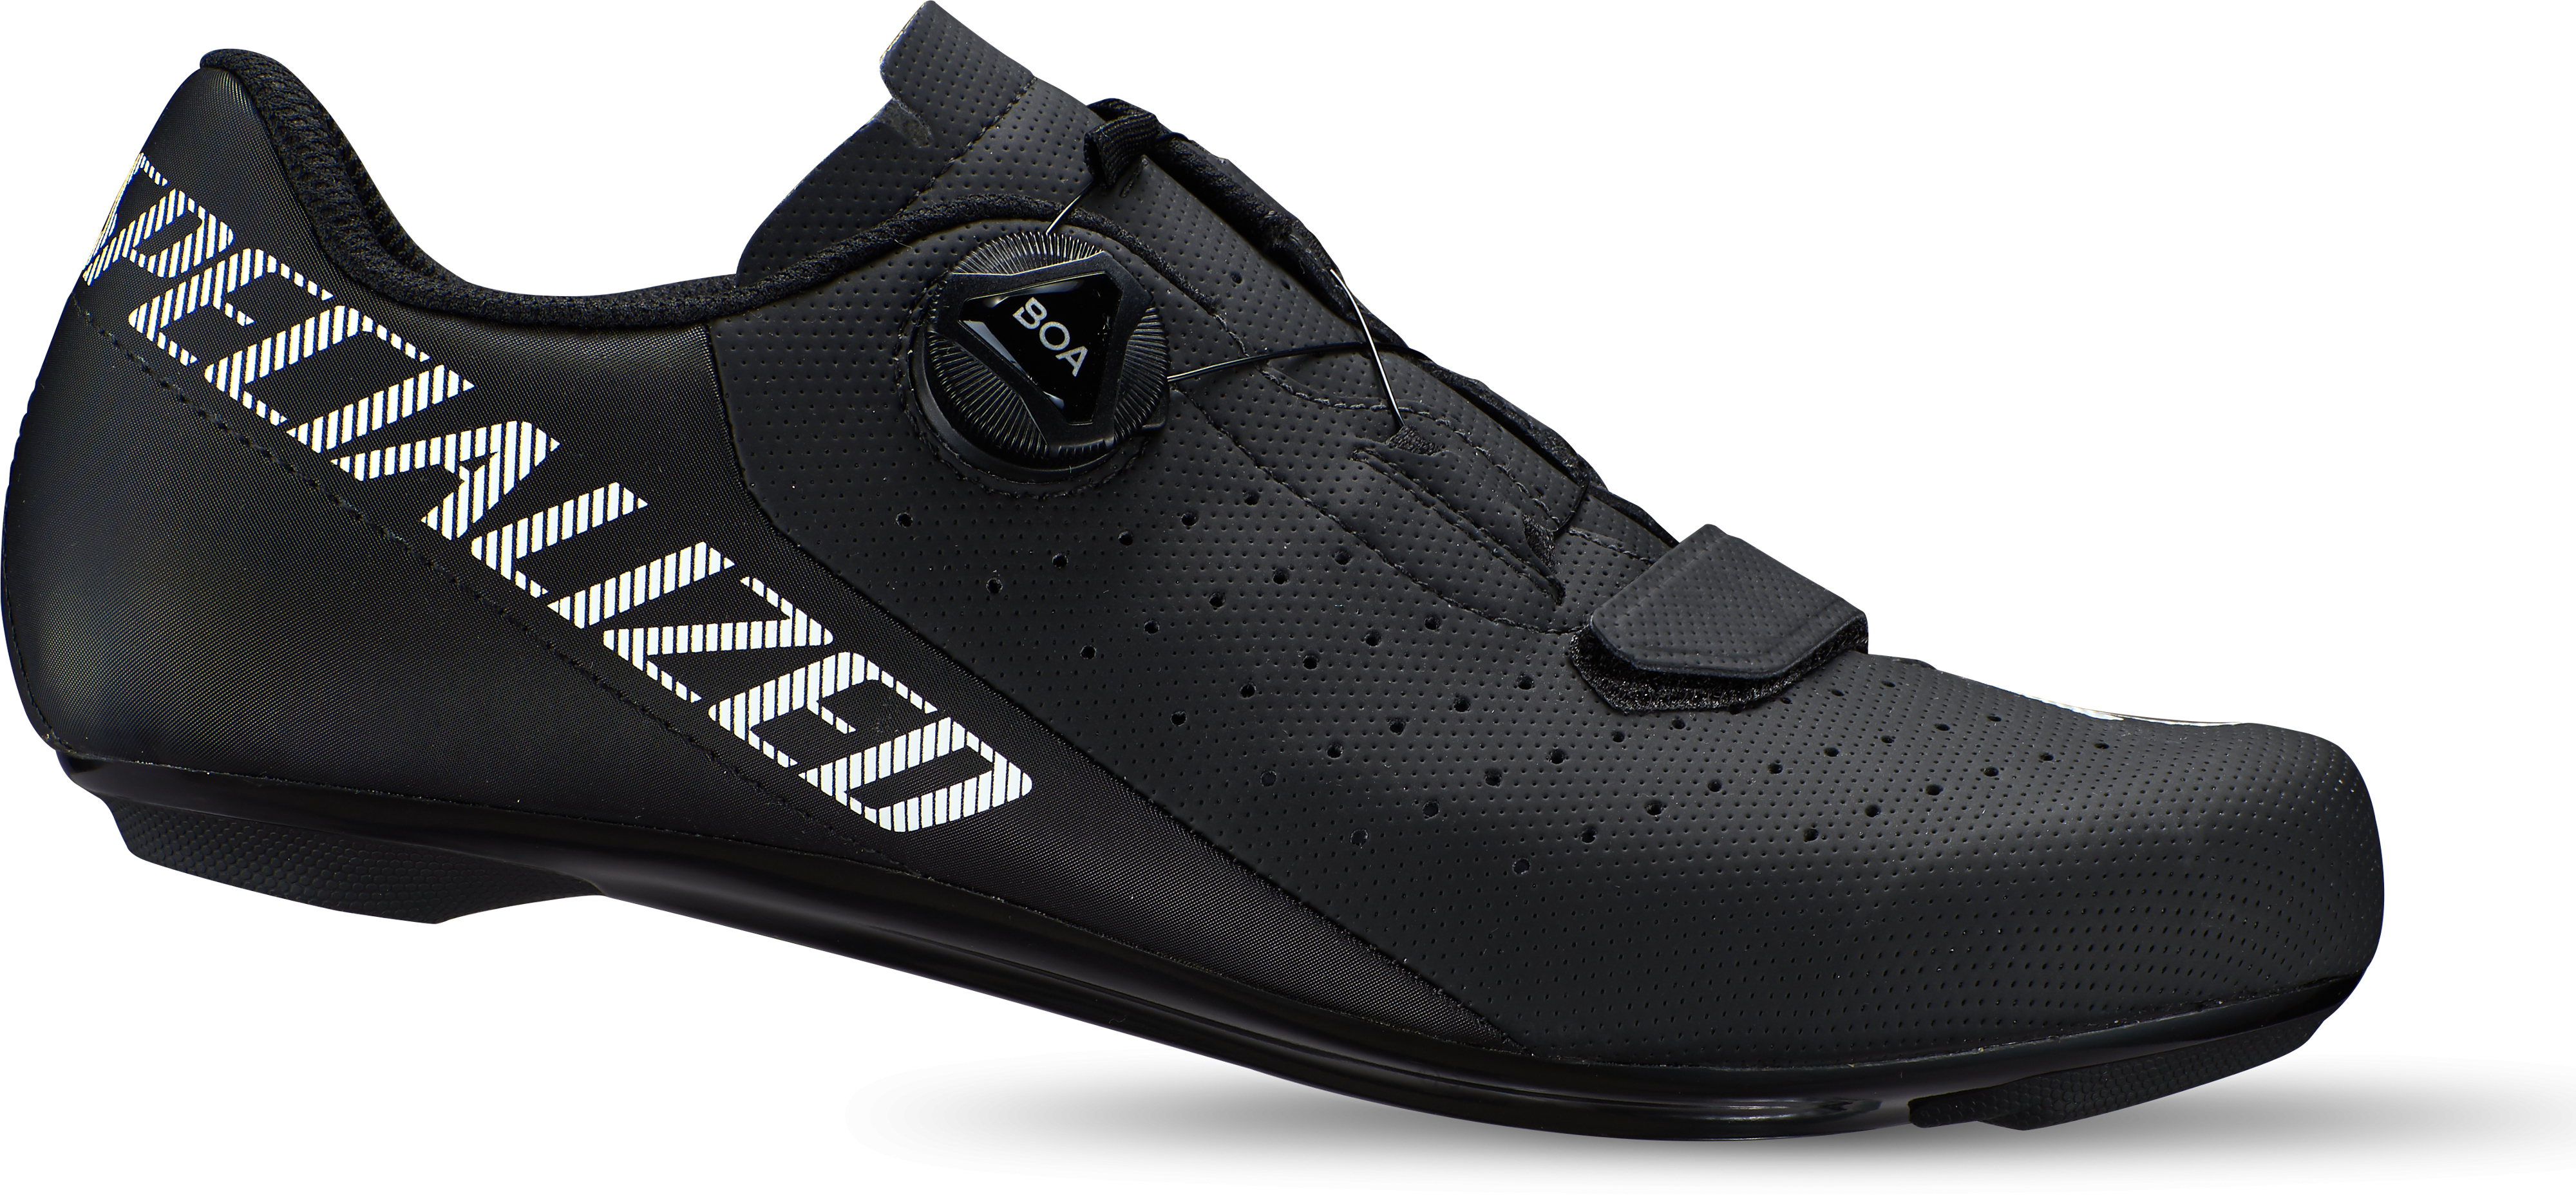 Specialized  Torch 1.0 Road Cycling Shoes  47 Black